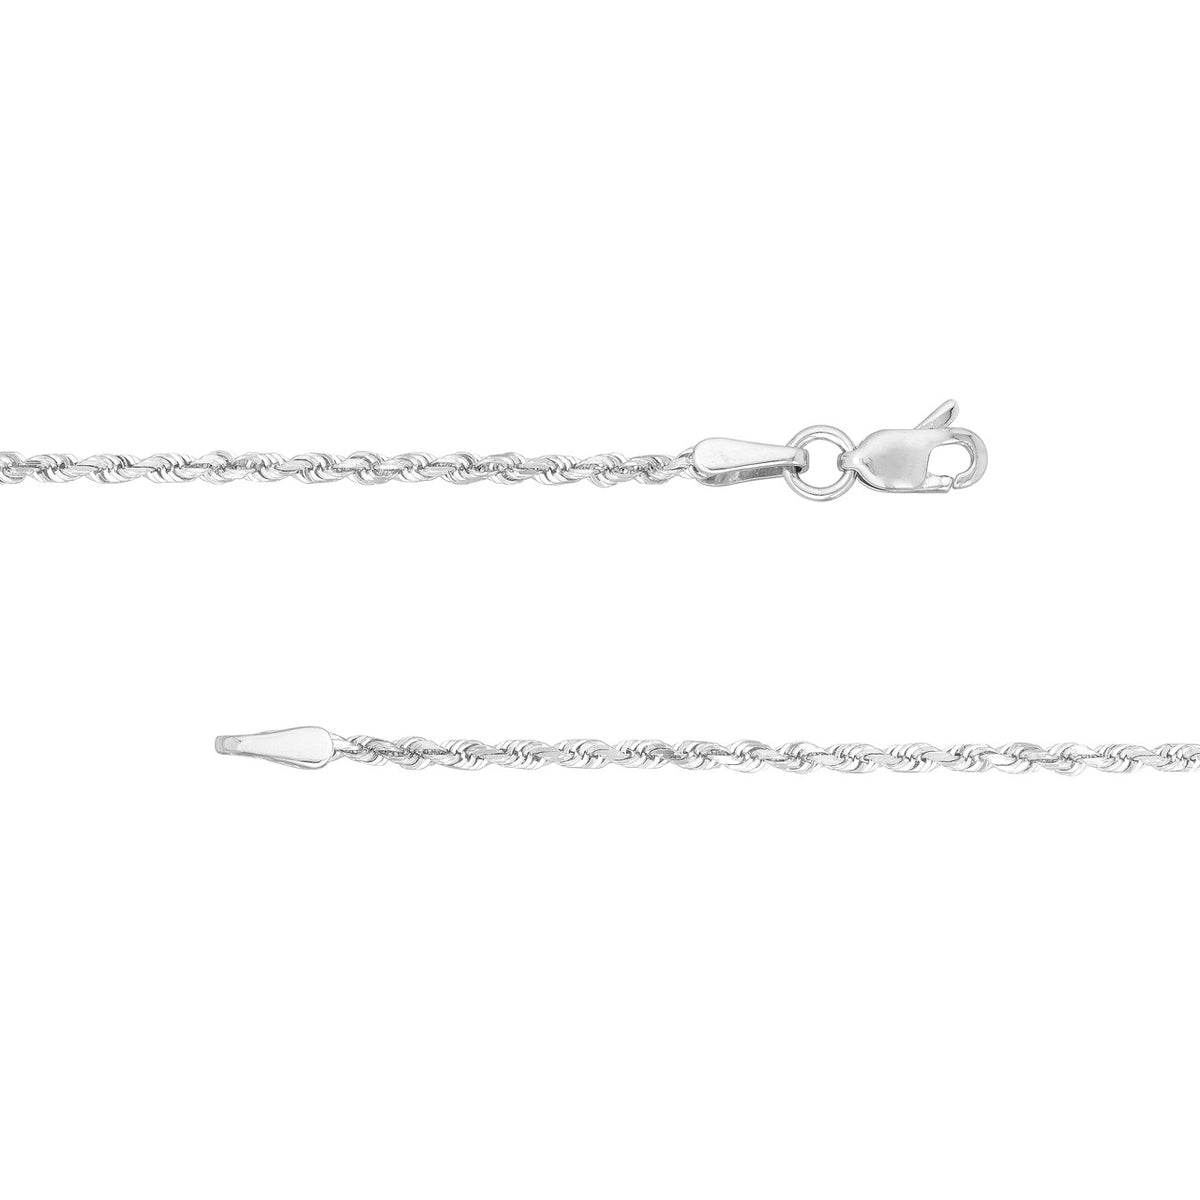 14K White Gold 1.75mm Solid Diamond Cut Rope Chain with Lobster Lock